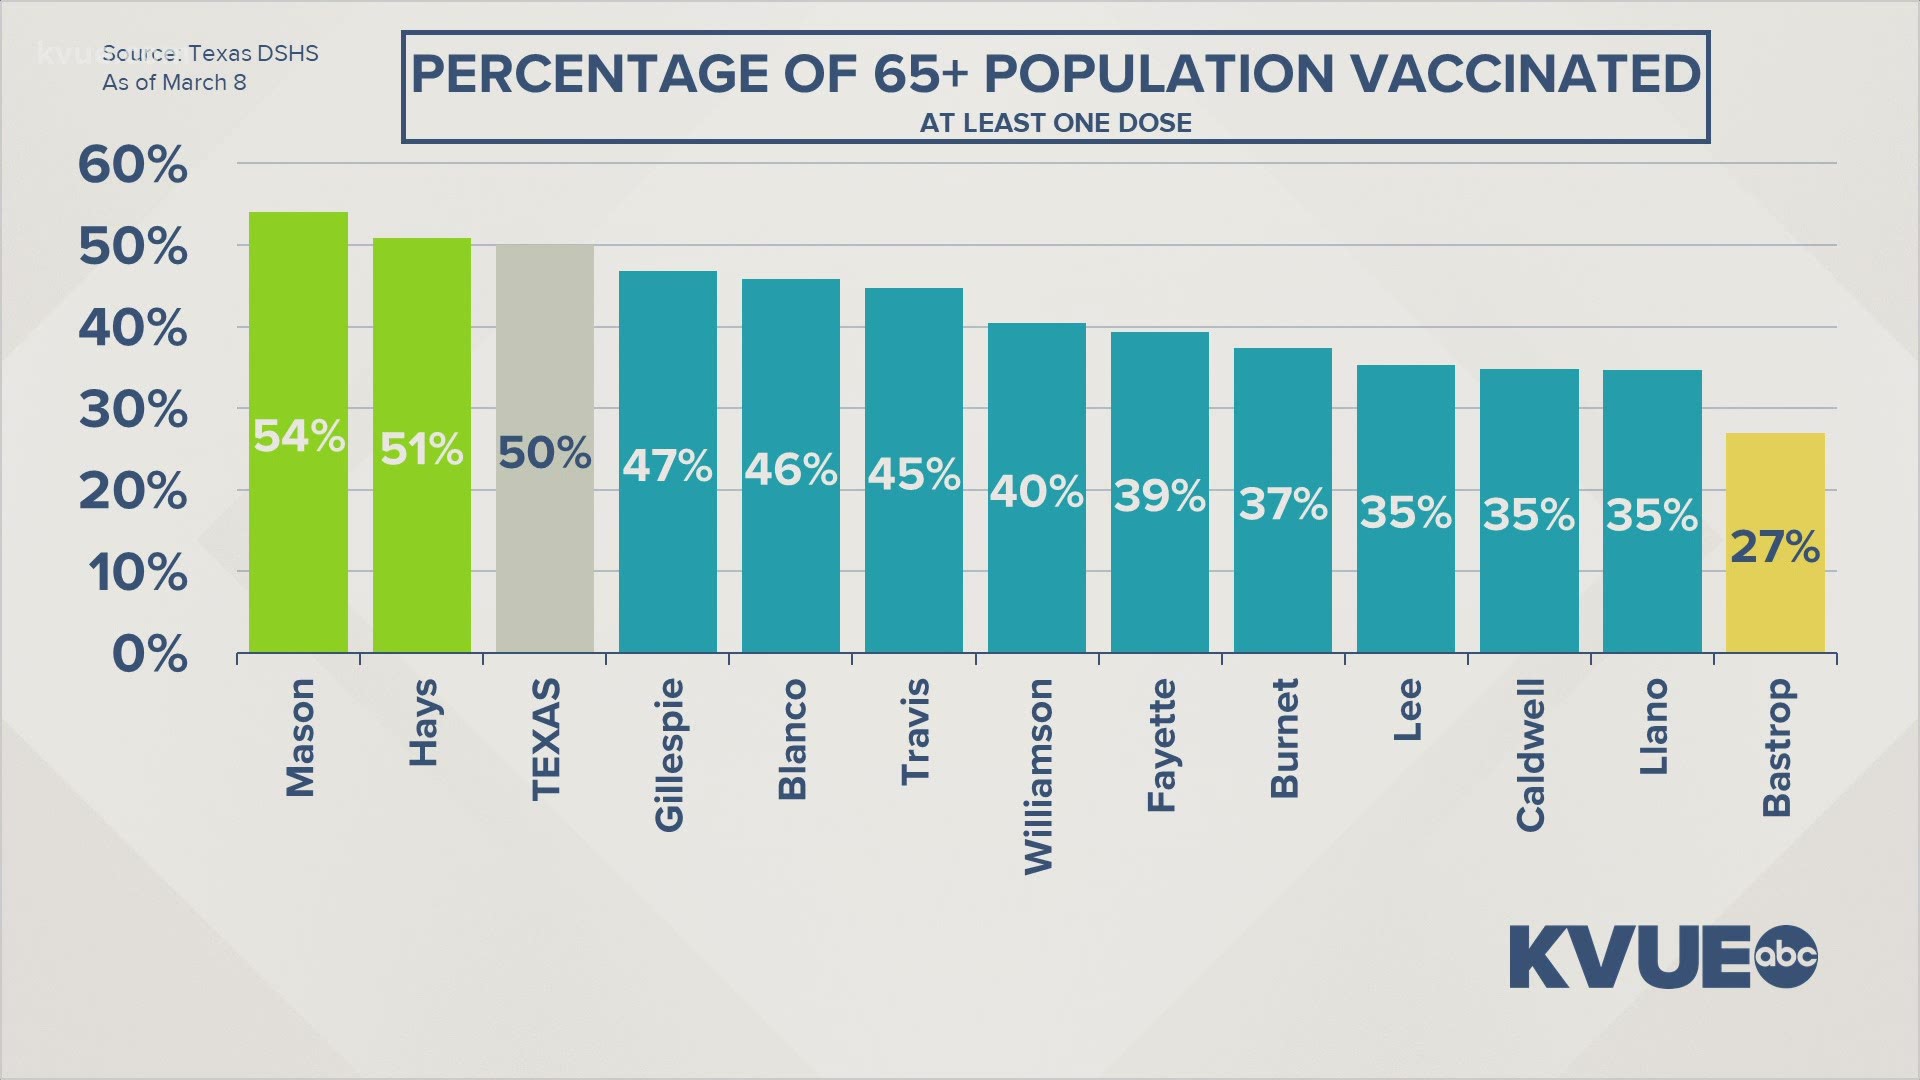 Gov. Greg Abbott is touting vaccinations in the state. He says shots have been given to more than 50% of seniors – ahead of schedule.